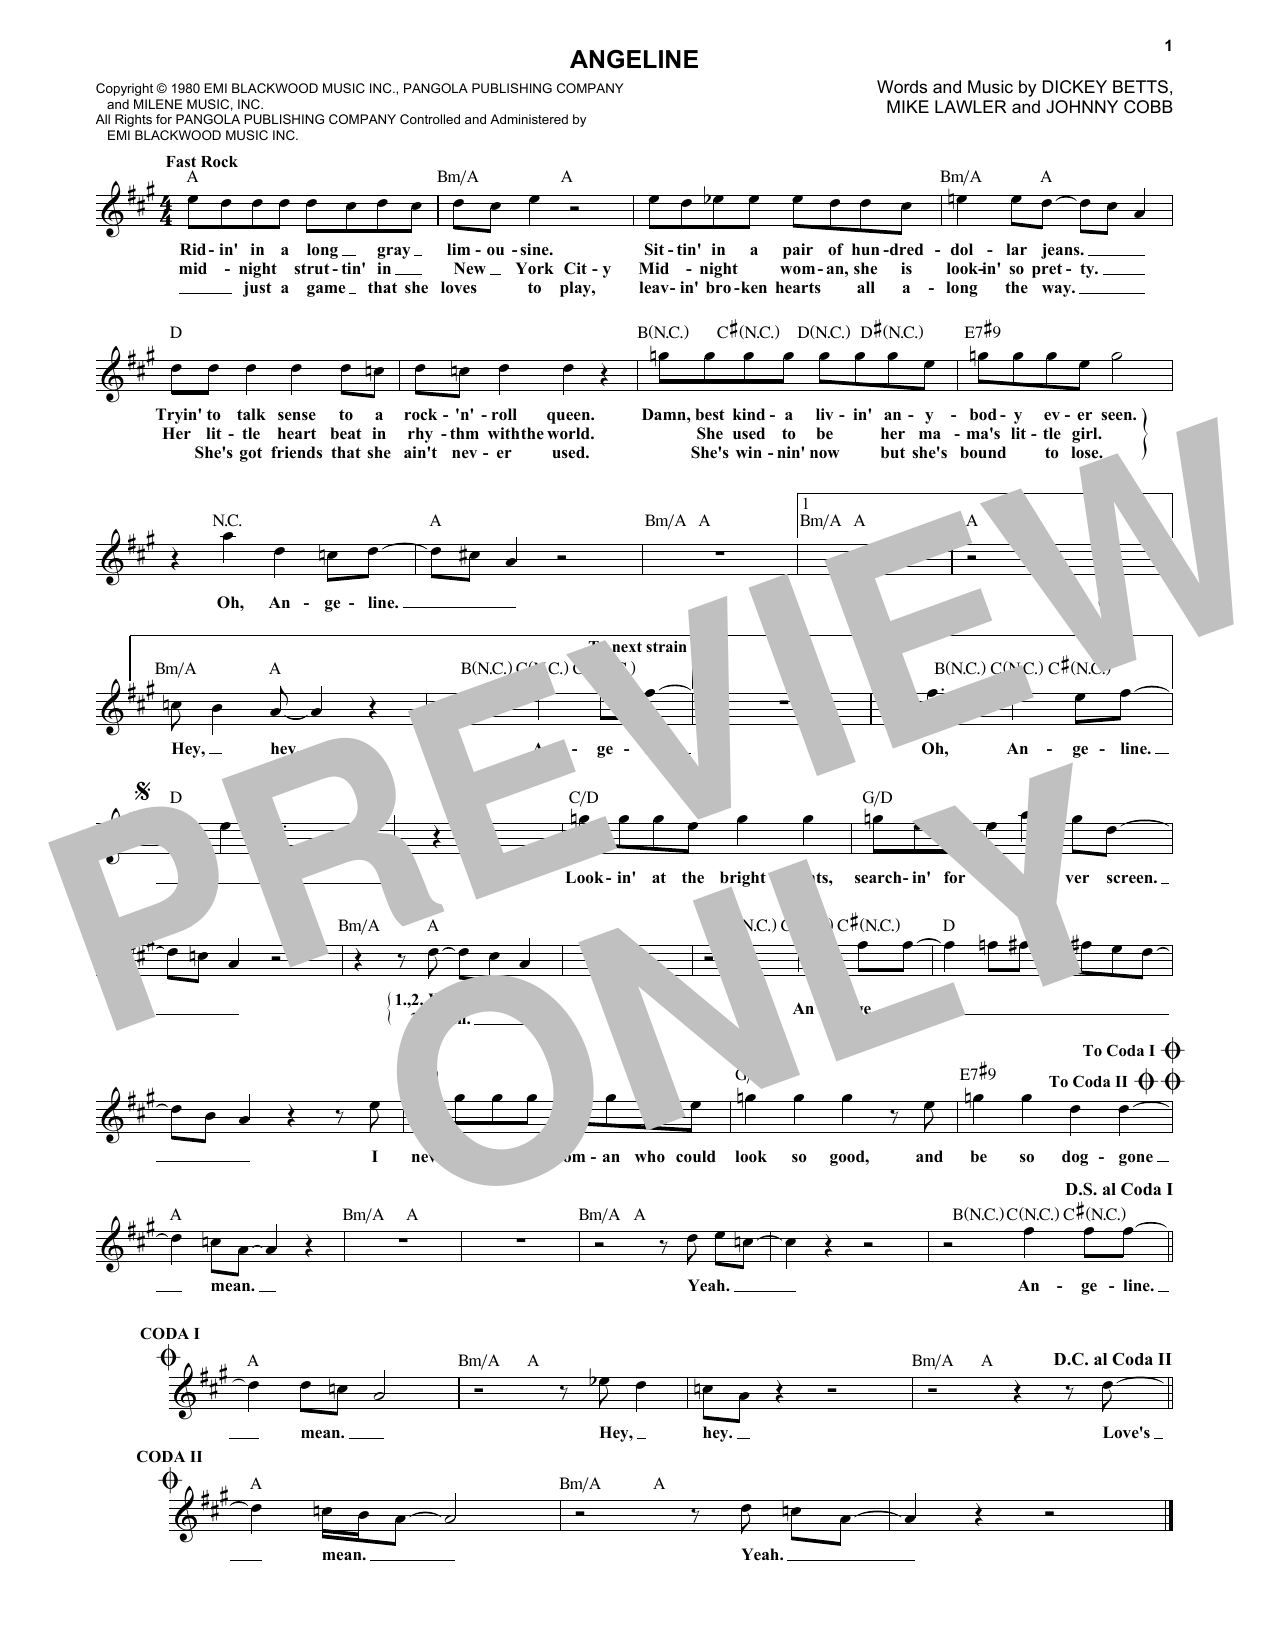 Download The Allman Brothers Band Angeline Sheet Music